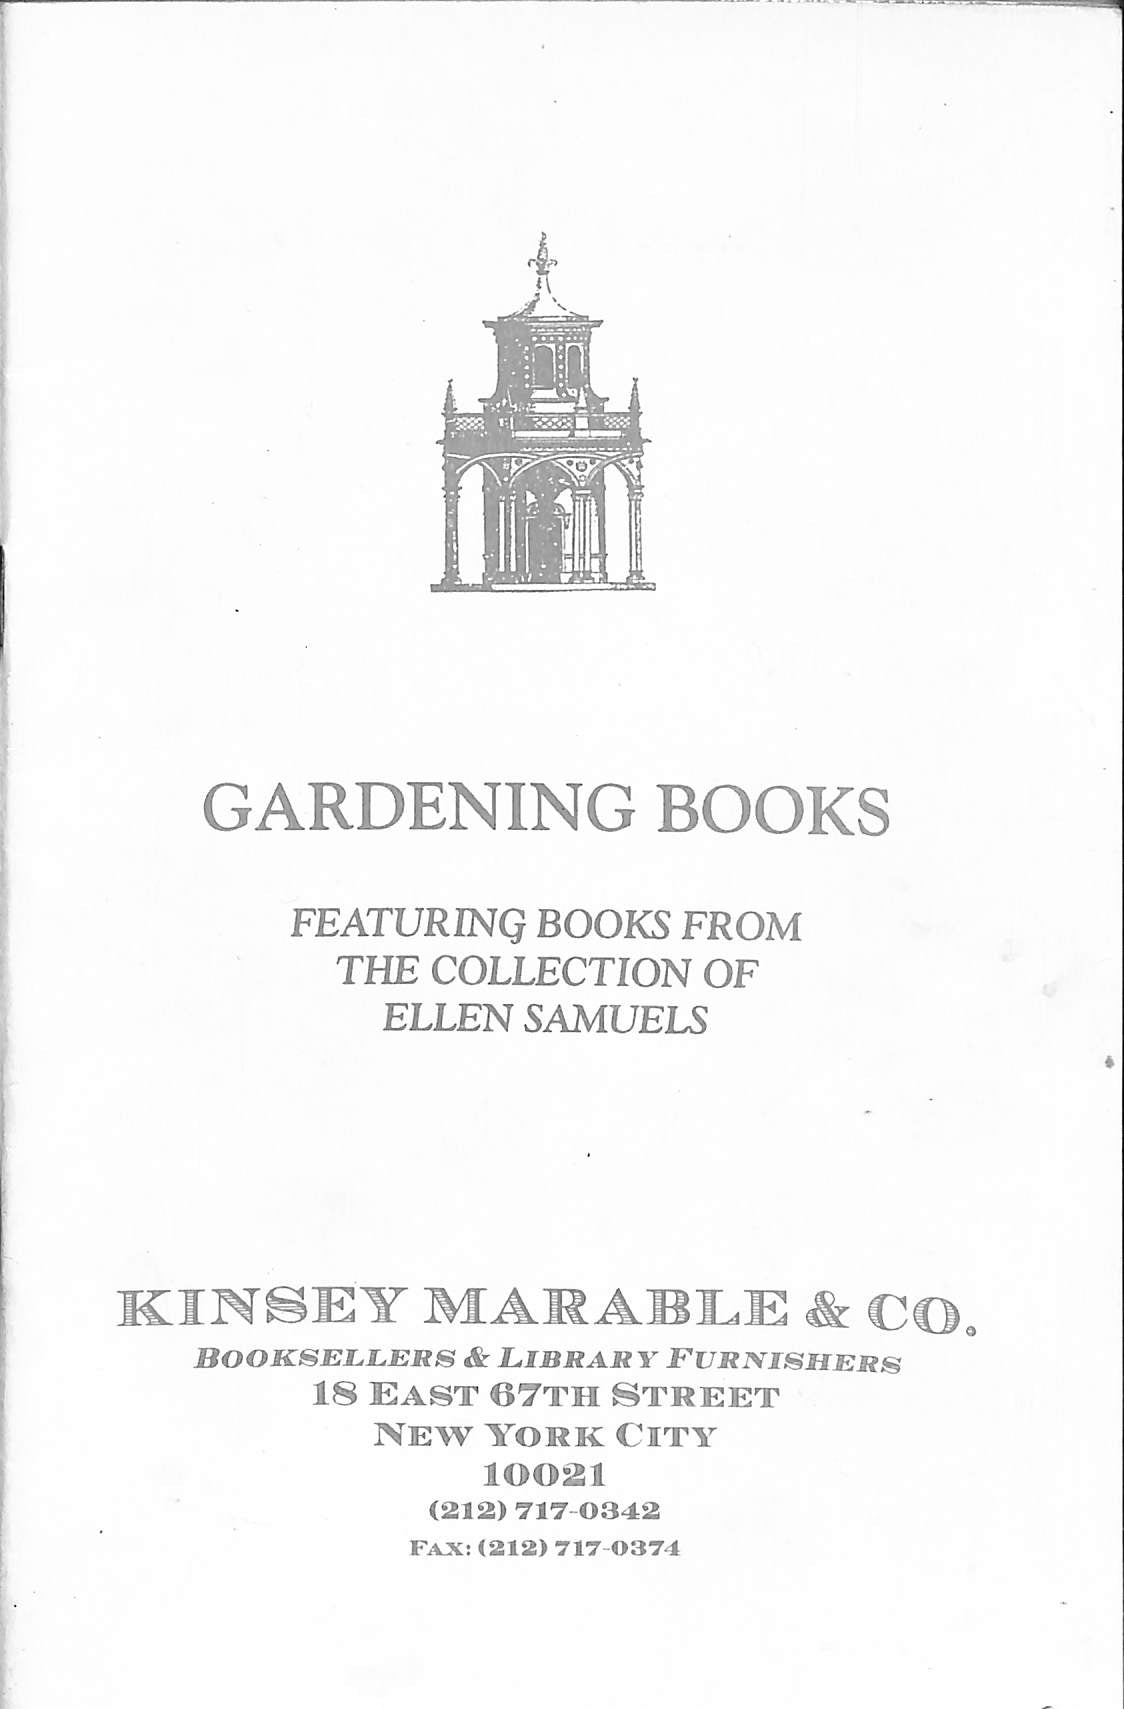 "Gardening Books Featuring Books From The Collection Of Ellen Samuels"